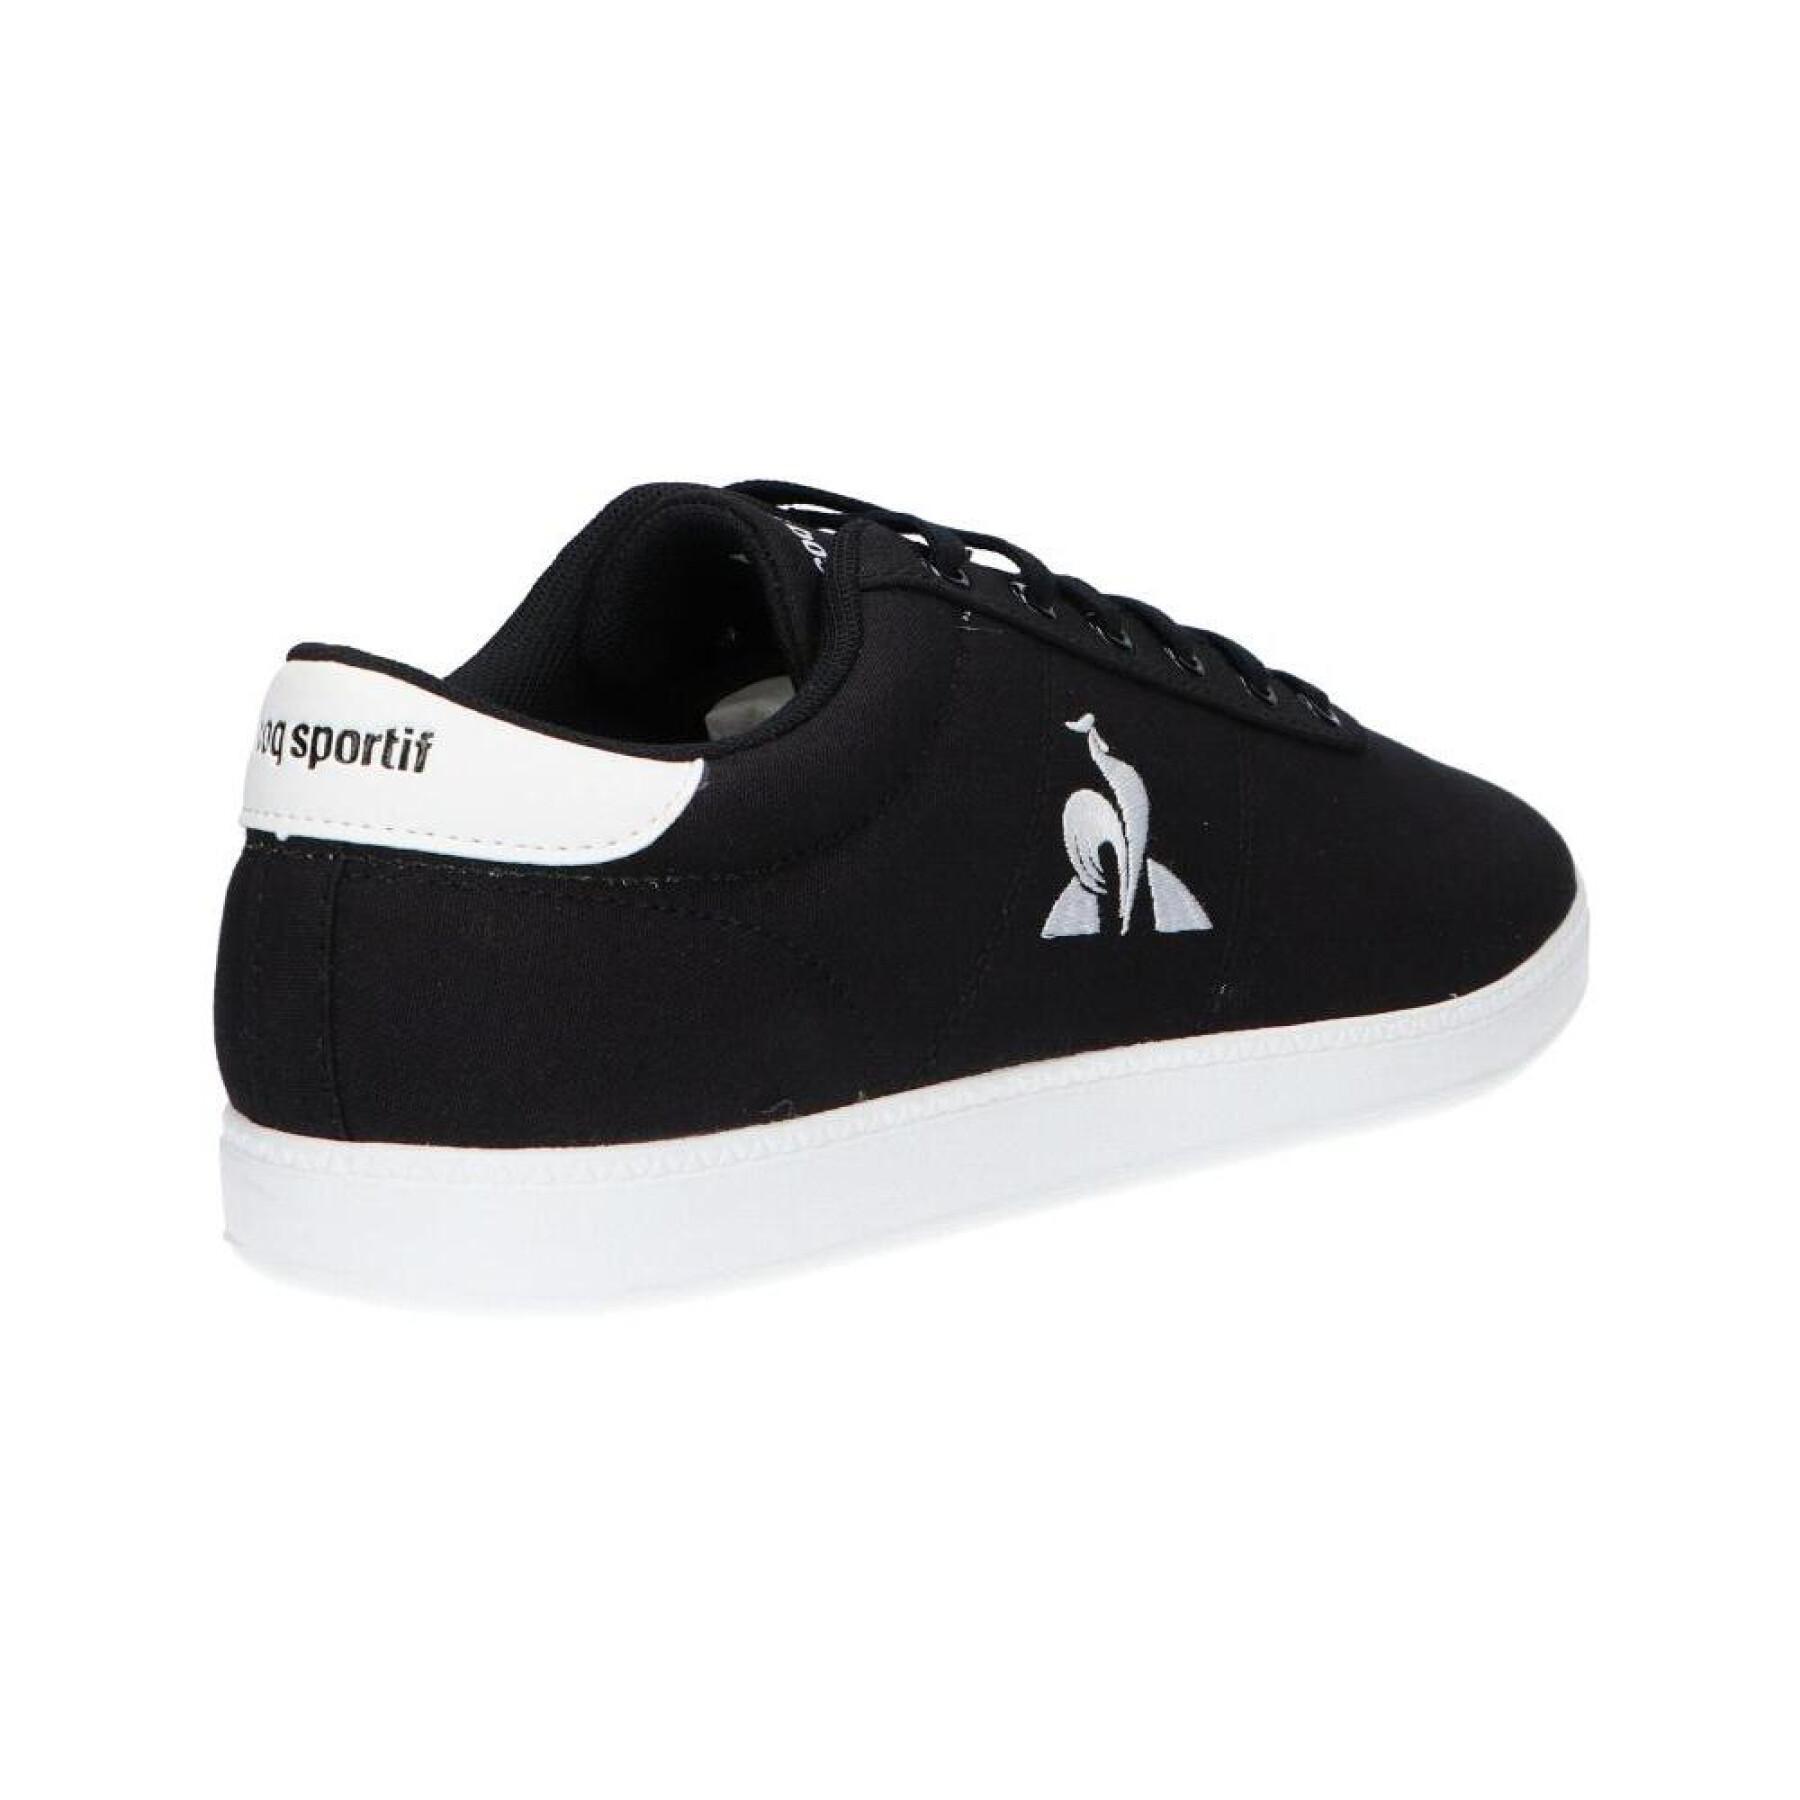 Formadores Le Coq Sportif Court One